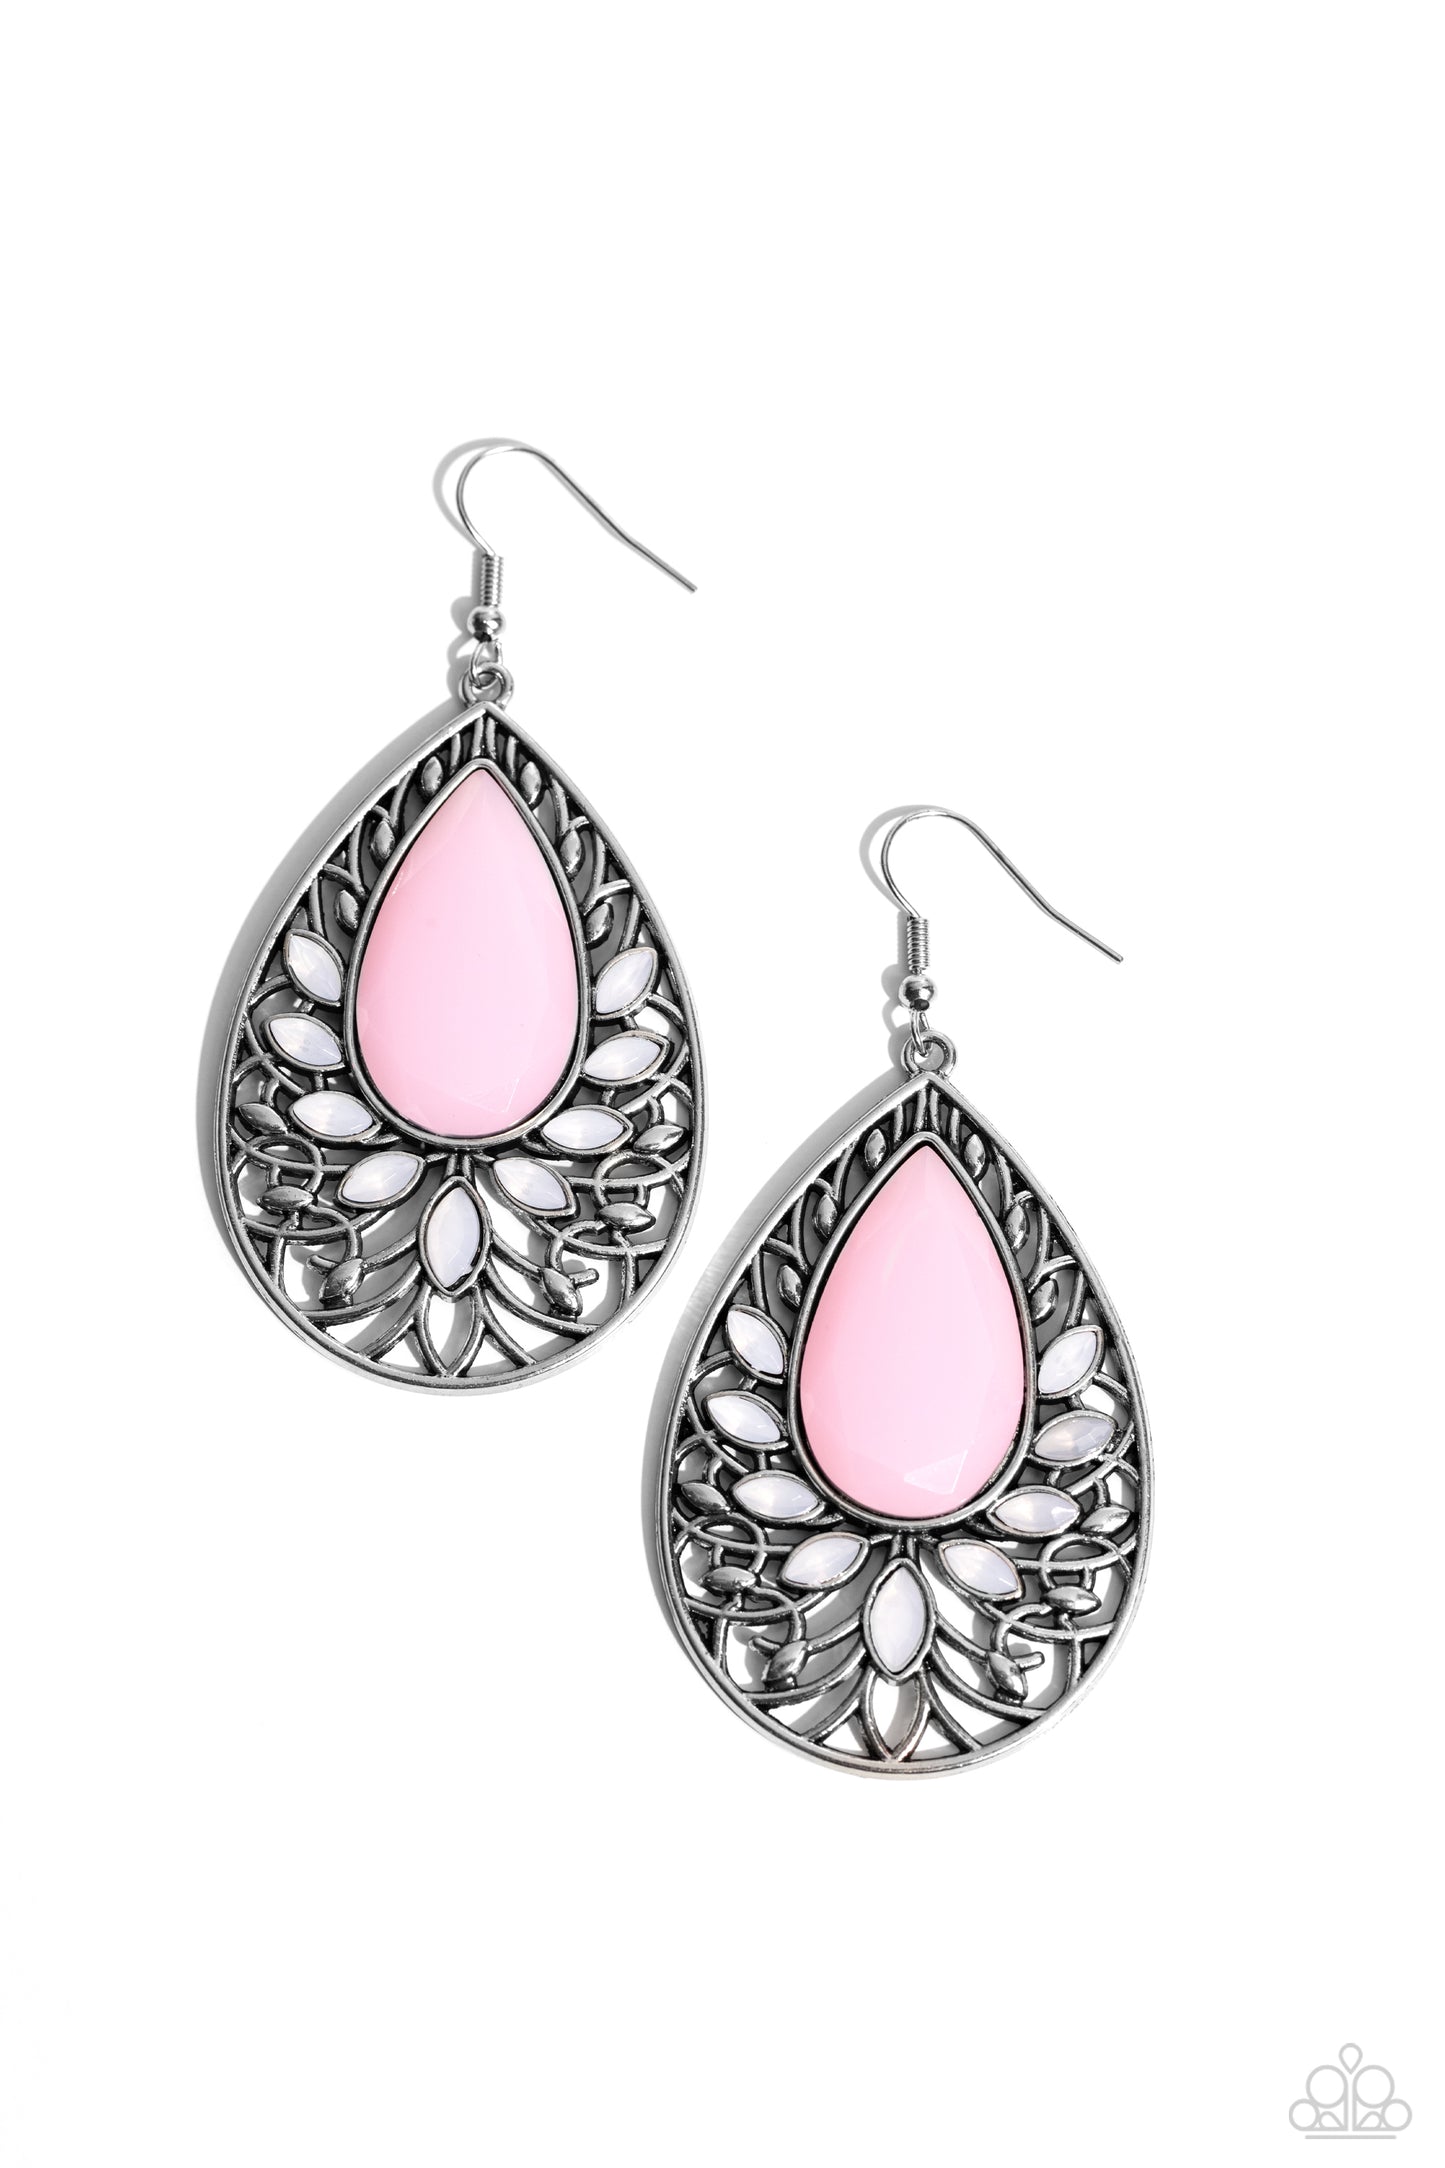 Floral Fairytale Pink Earring - Paparazzi Accessories  Marquise cut opalescent beads fan out from the bottom of an oversized Pale Rosette teardrop bead atop a leafy silver backdrop, resulting in a whimsical floral frame. Earring attaches to a standard fishhook fitting.  Featured inside The Preview at Made for More! Sold as one pair of earrings.  Sku:  P5ST-PKXX-021XX  New Kit